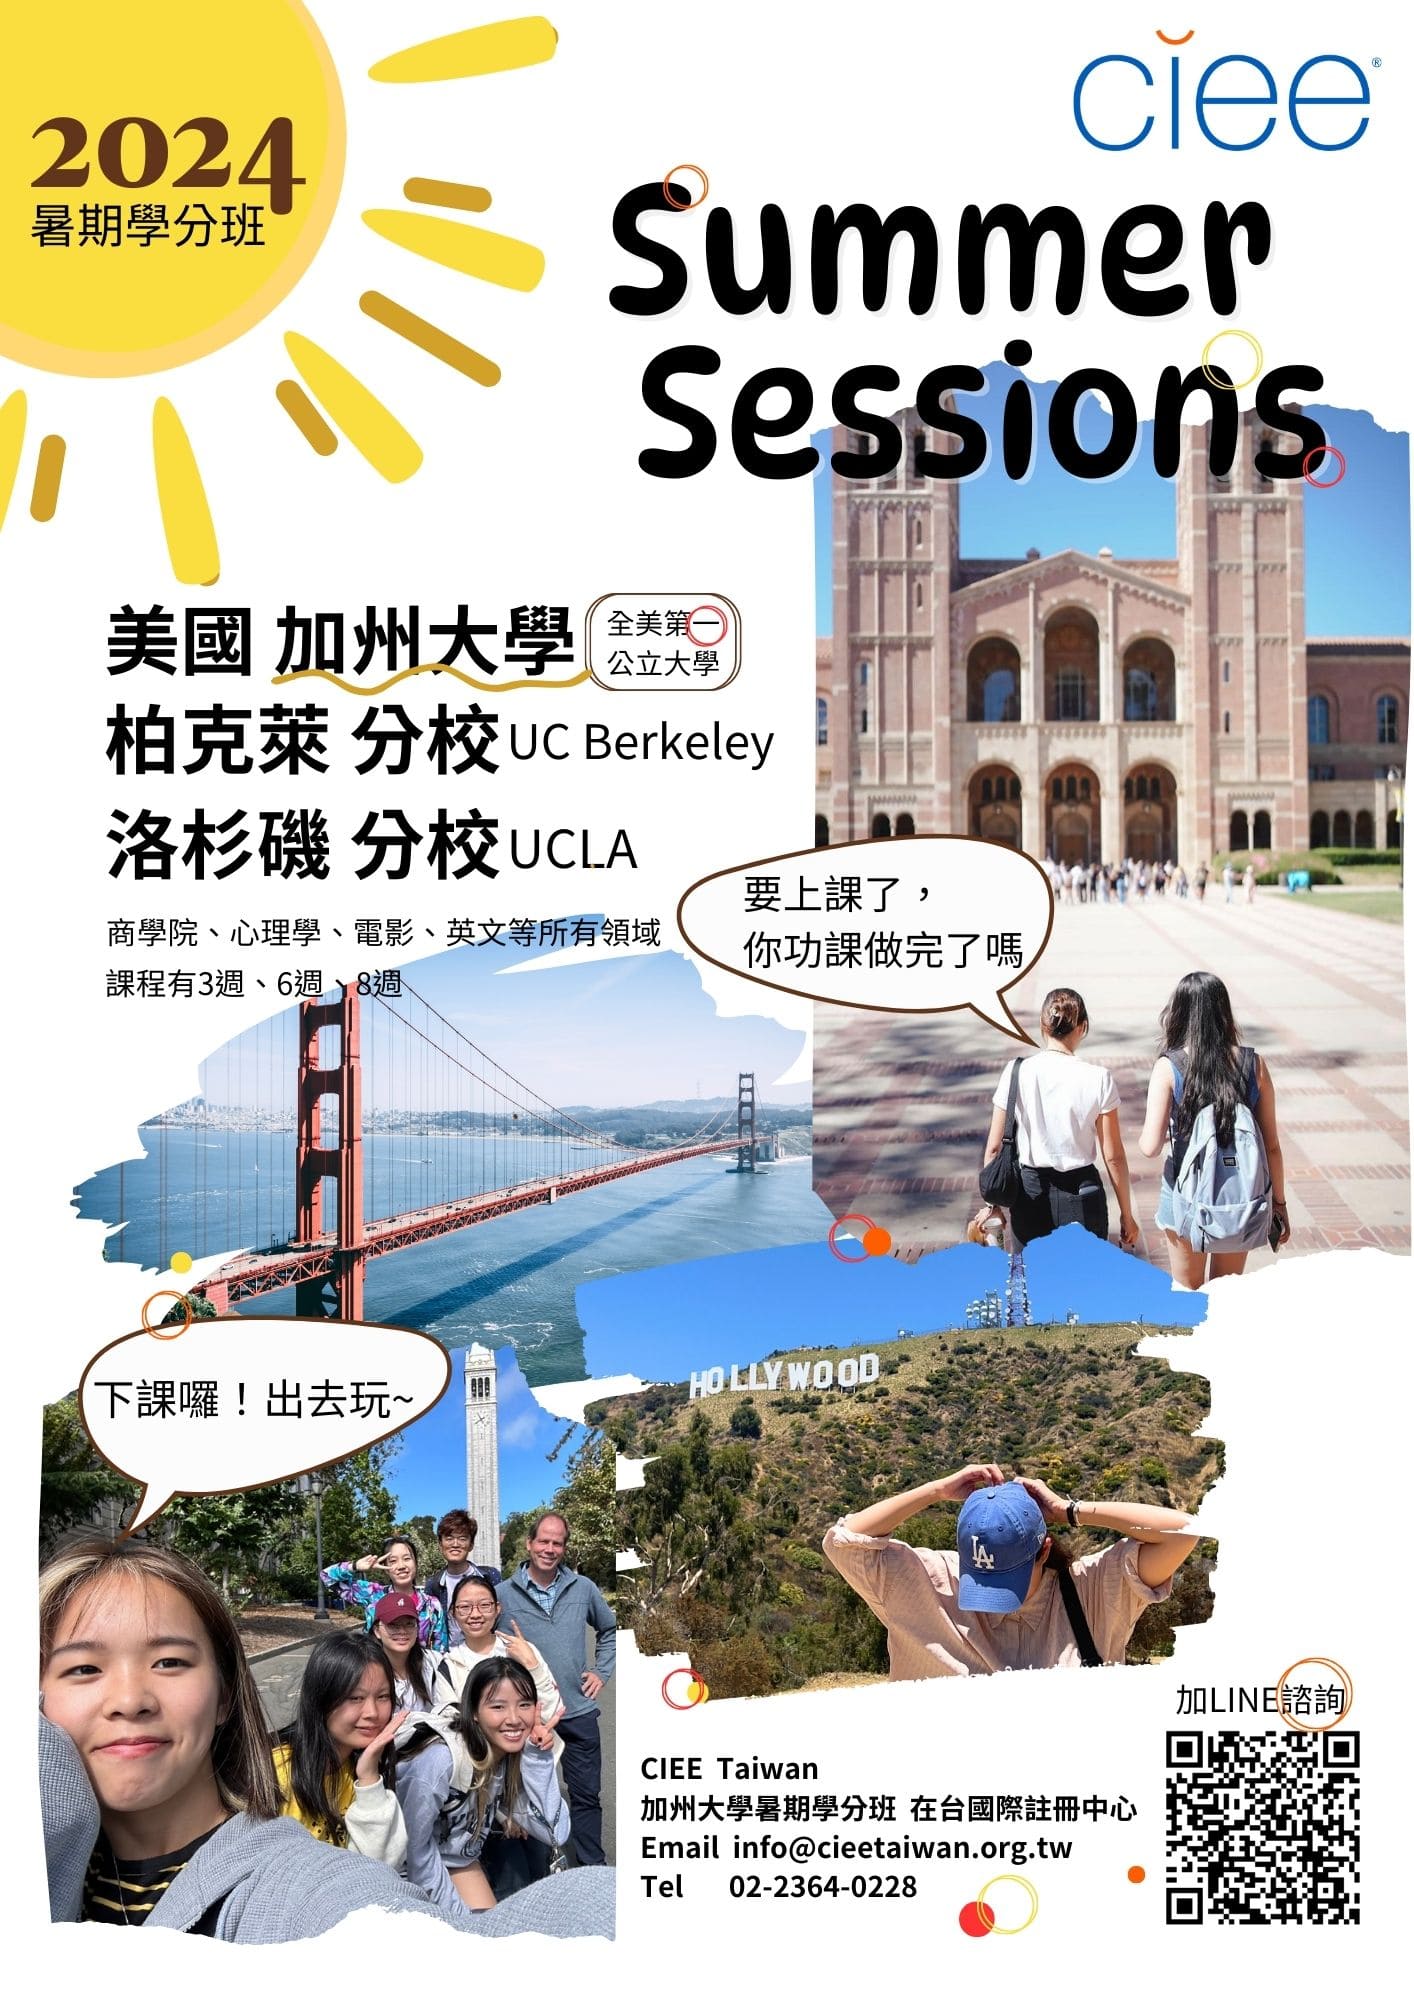 Featured image for “UC Berkeley and UCLA Summer Sessions”